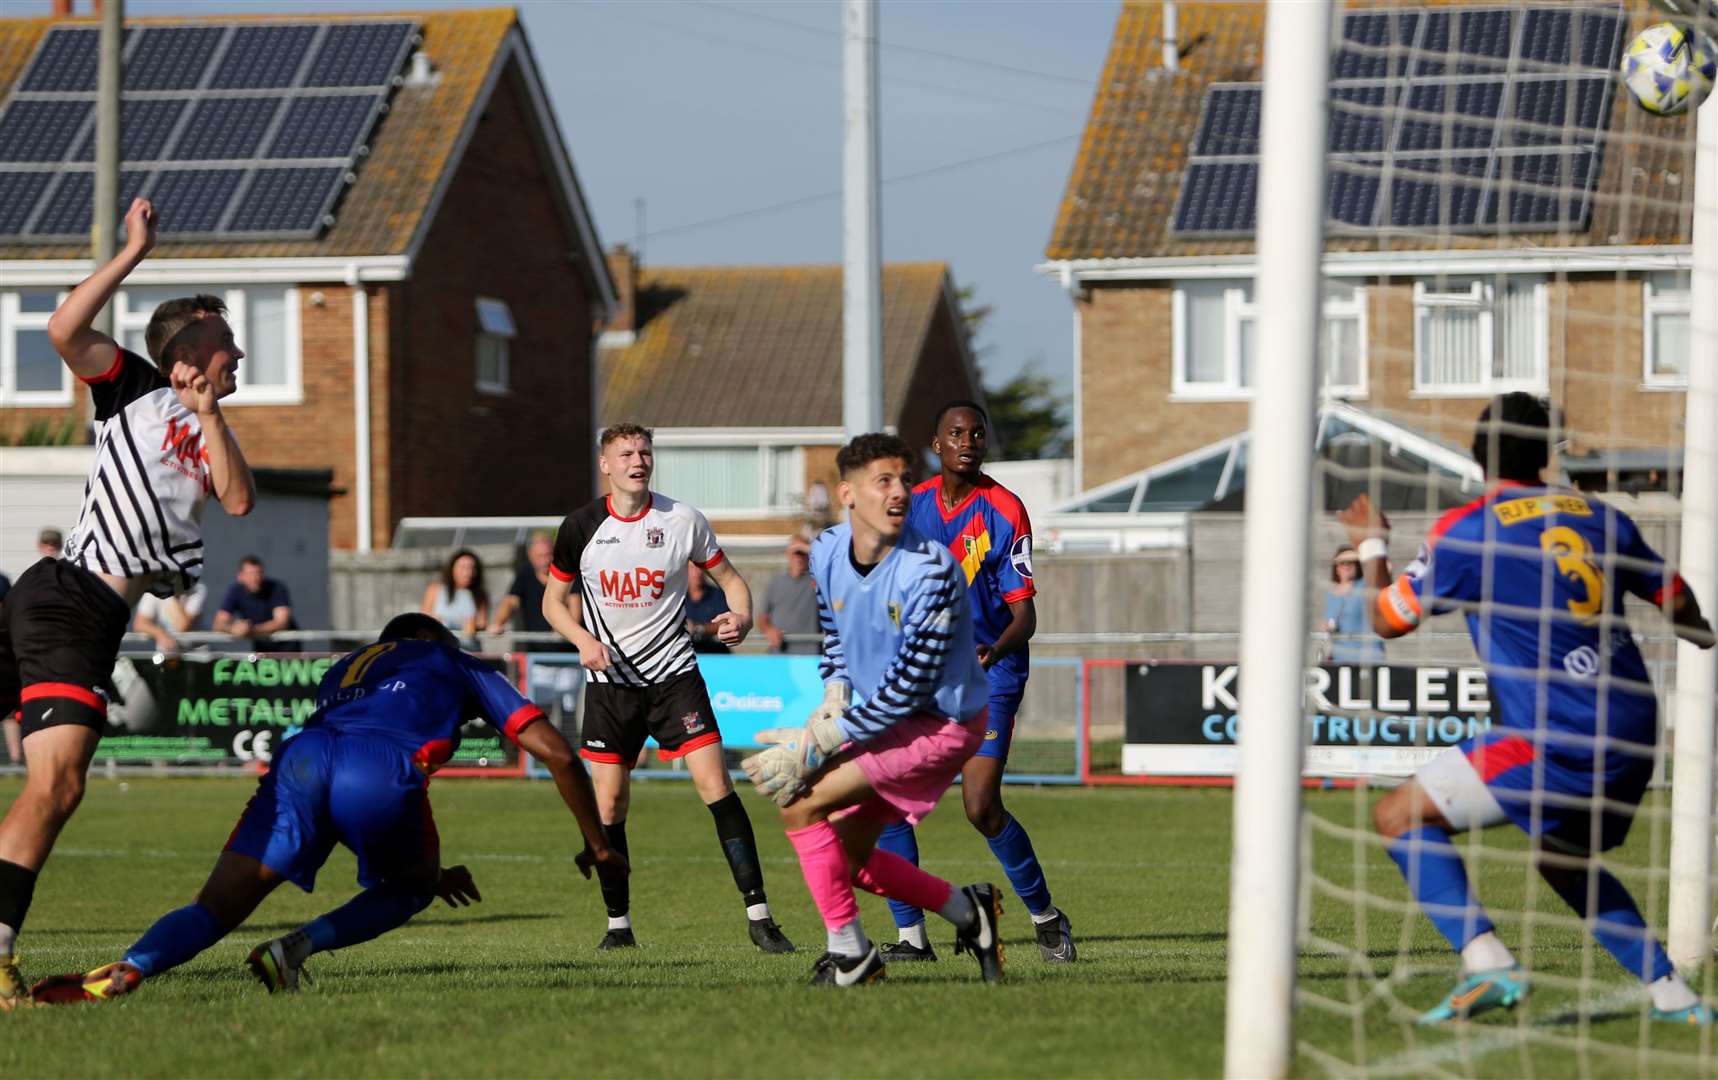 Rory Smith heads home the first of his two goals for Deal in their weekend 4-3 Kent Senior Trophy triumph. Picture: Paul Willmott